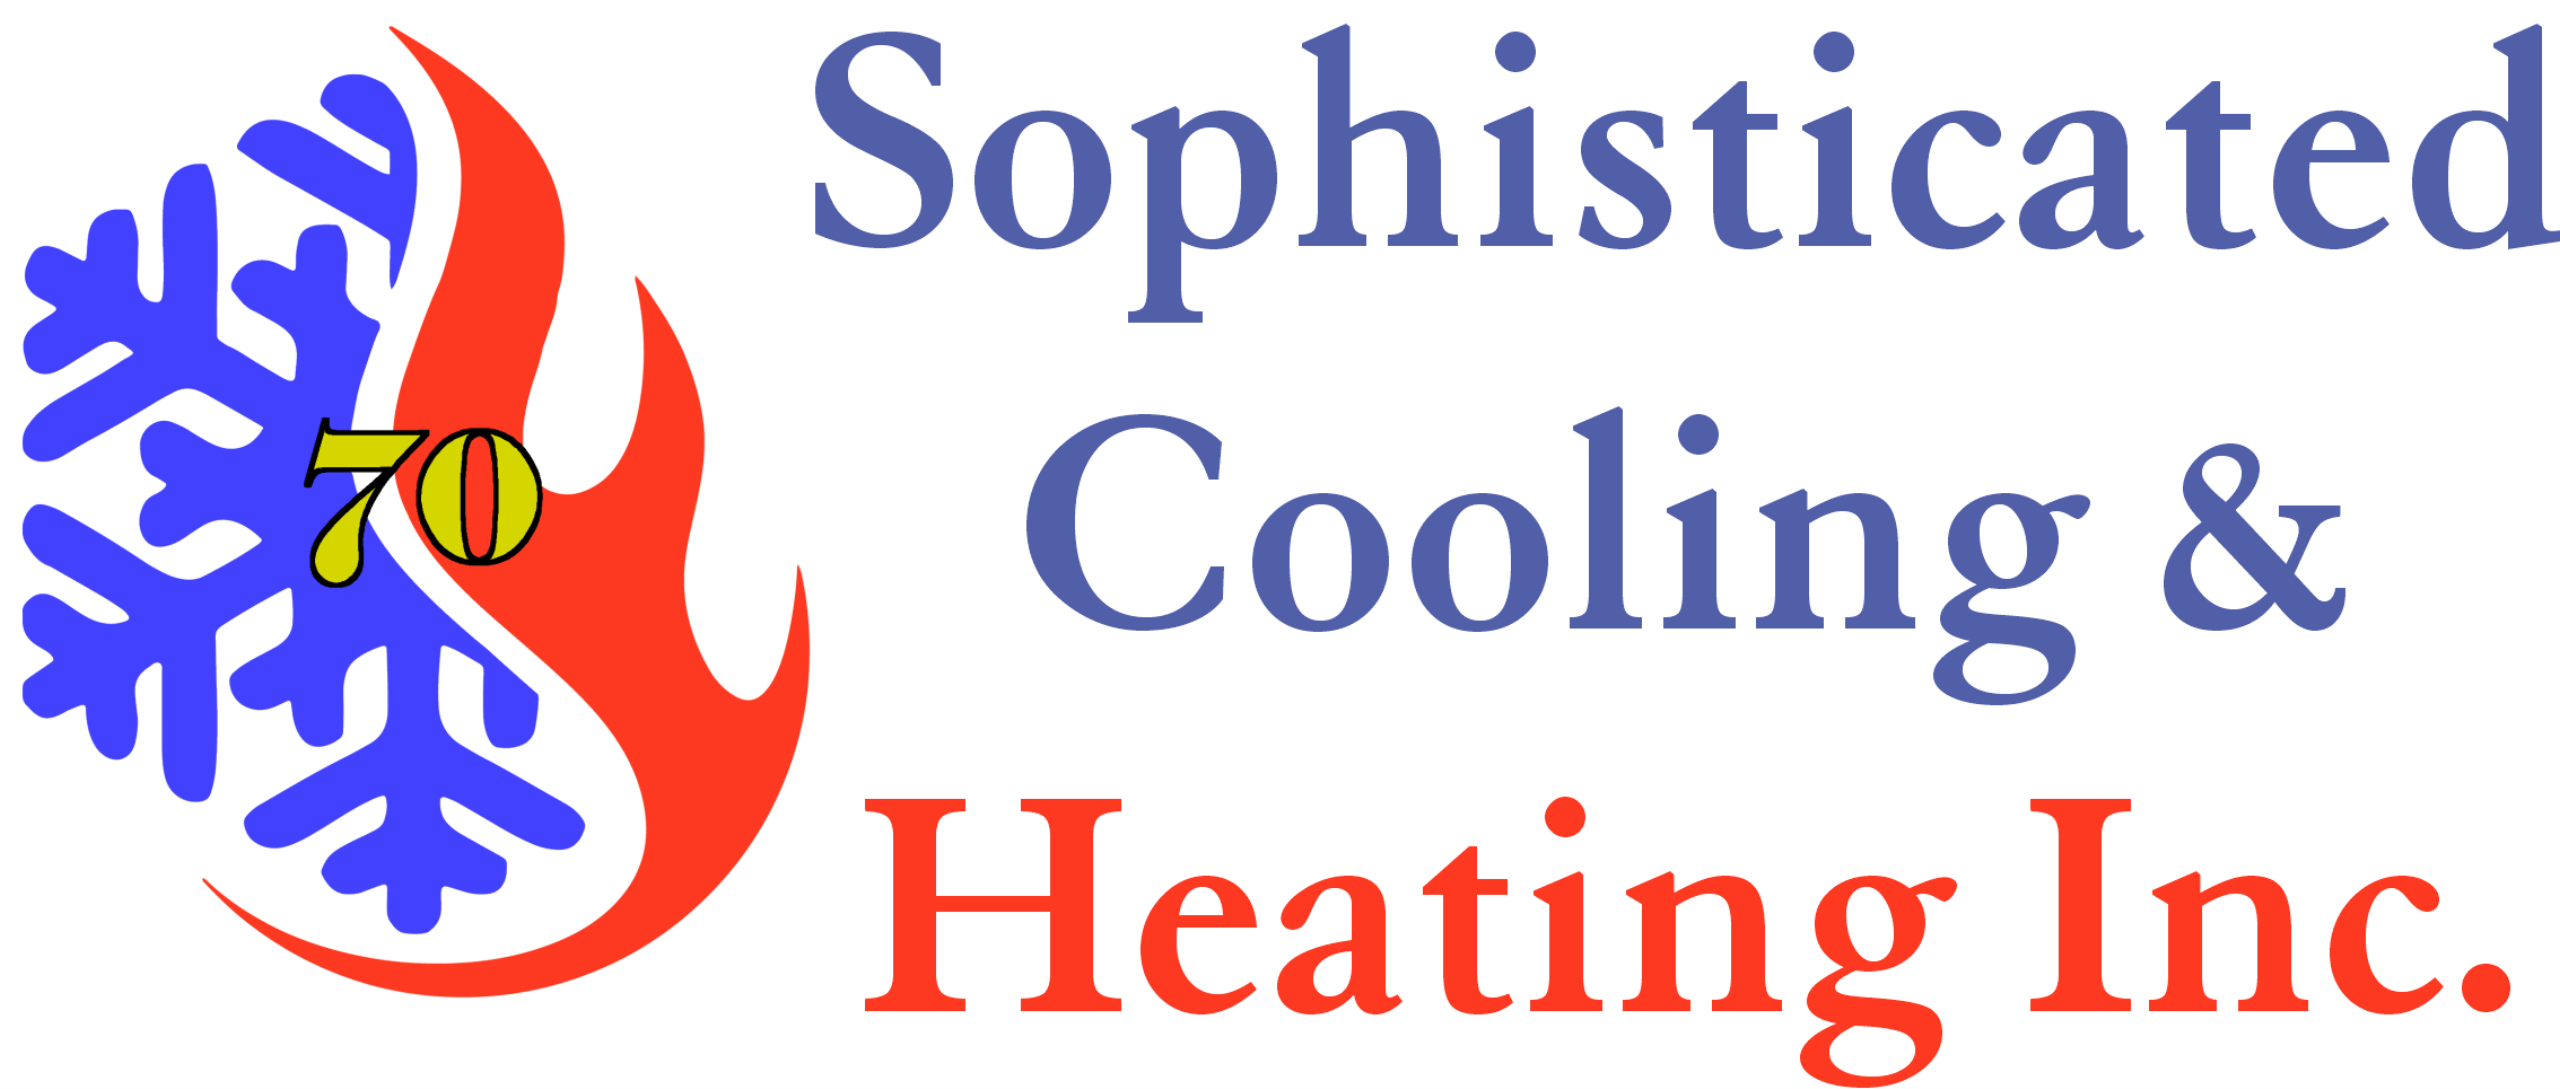 Sophisticated Cooling & Heating, Inc. Logo